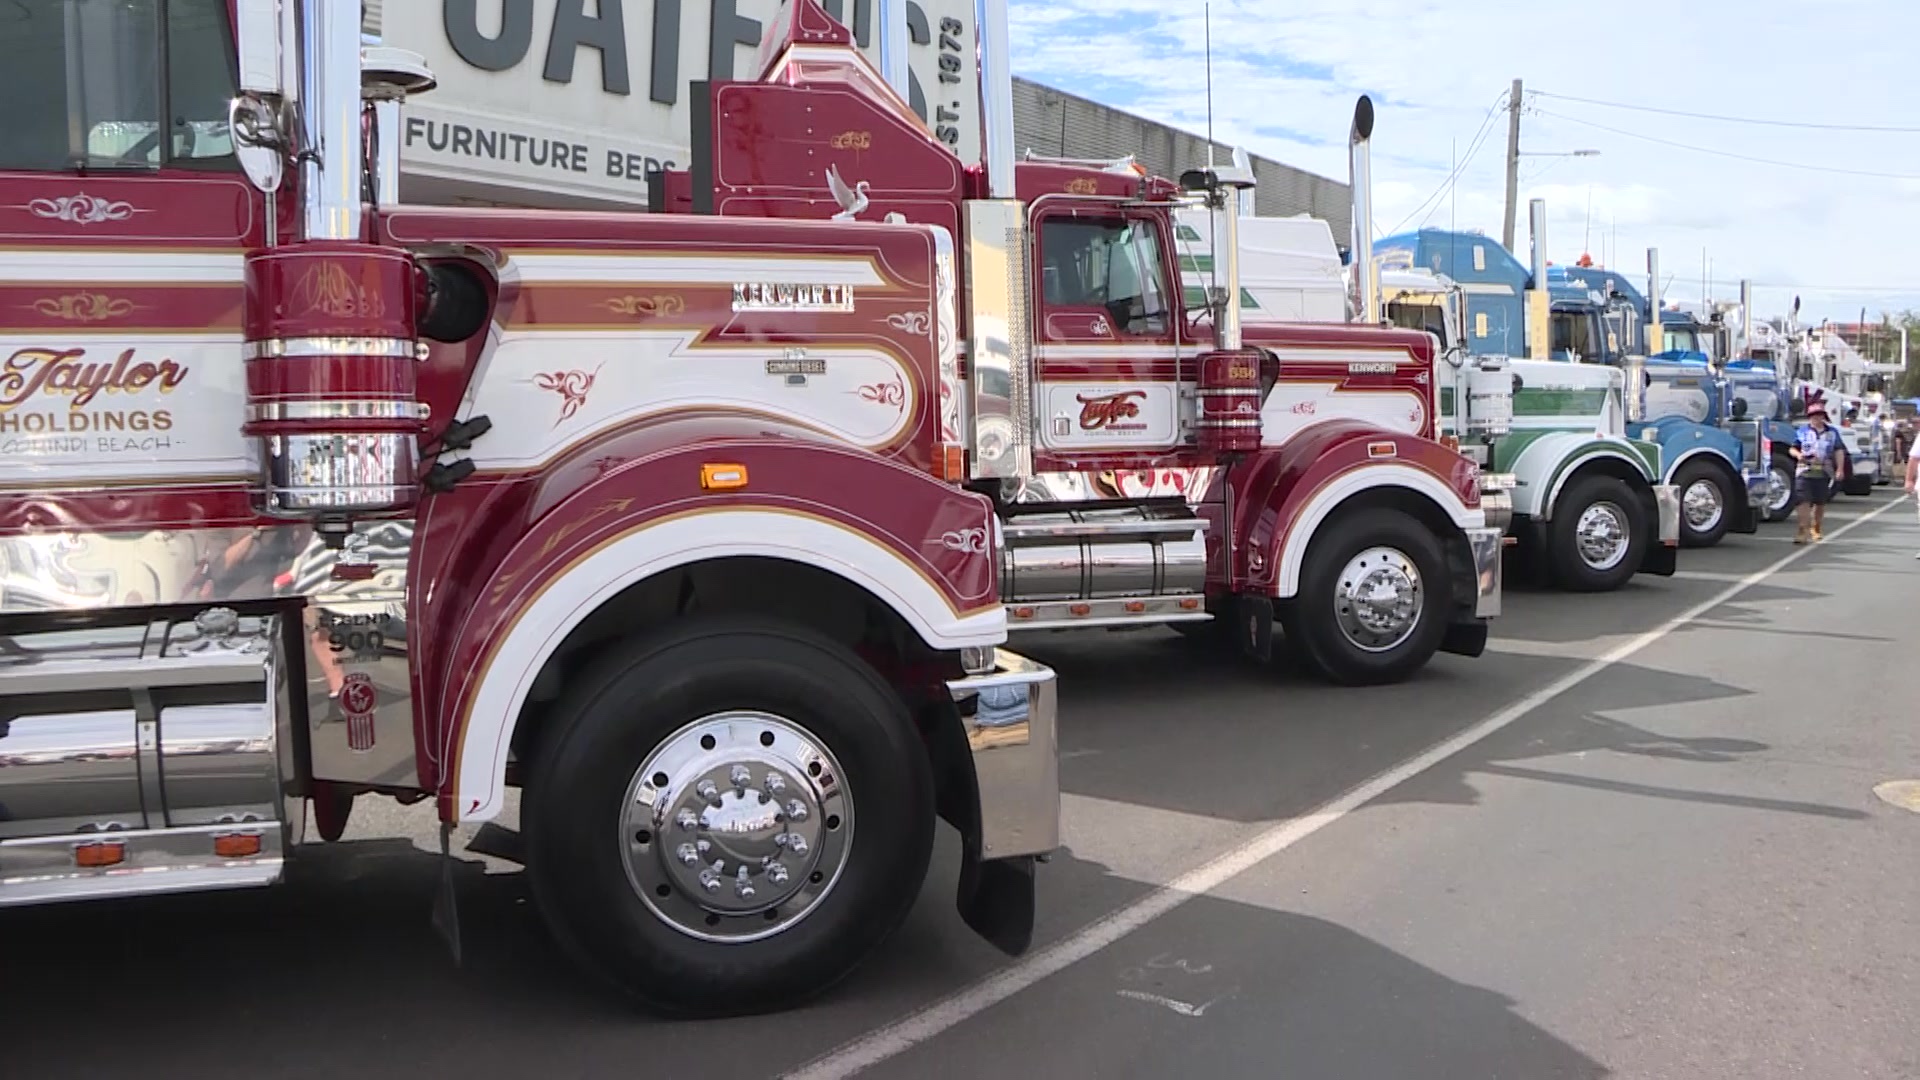 THOUSANDS OF BIG RIG ETHUSIASTS ROLL INTO TOWN FOR CASINO TRUCK SHOW